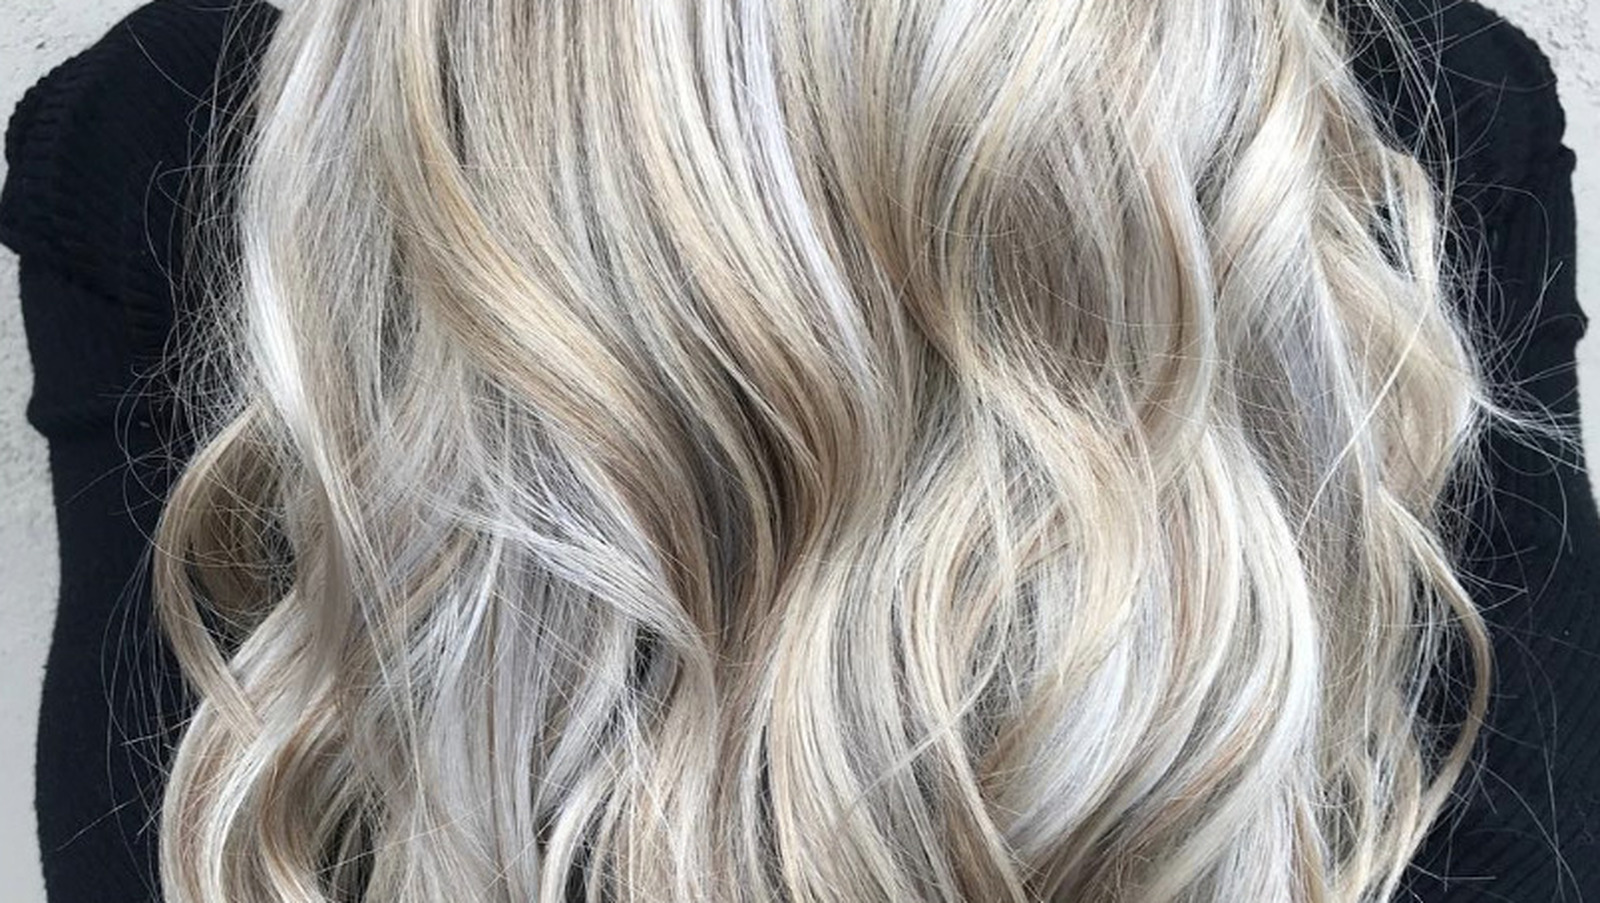 5. "Blue Highlights in Gray Hair: Pros and Cons" - wide 11